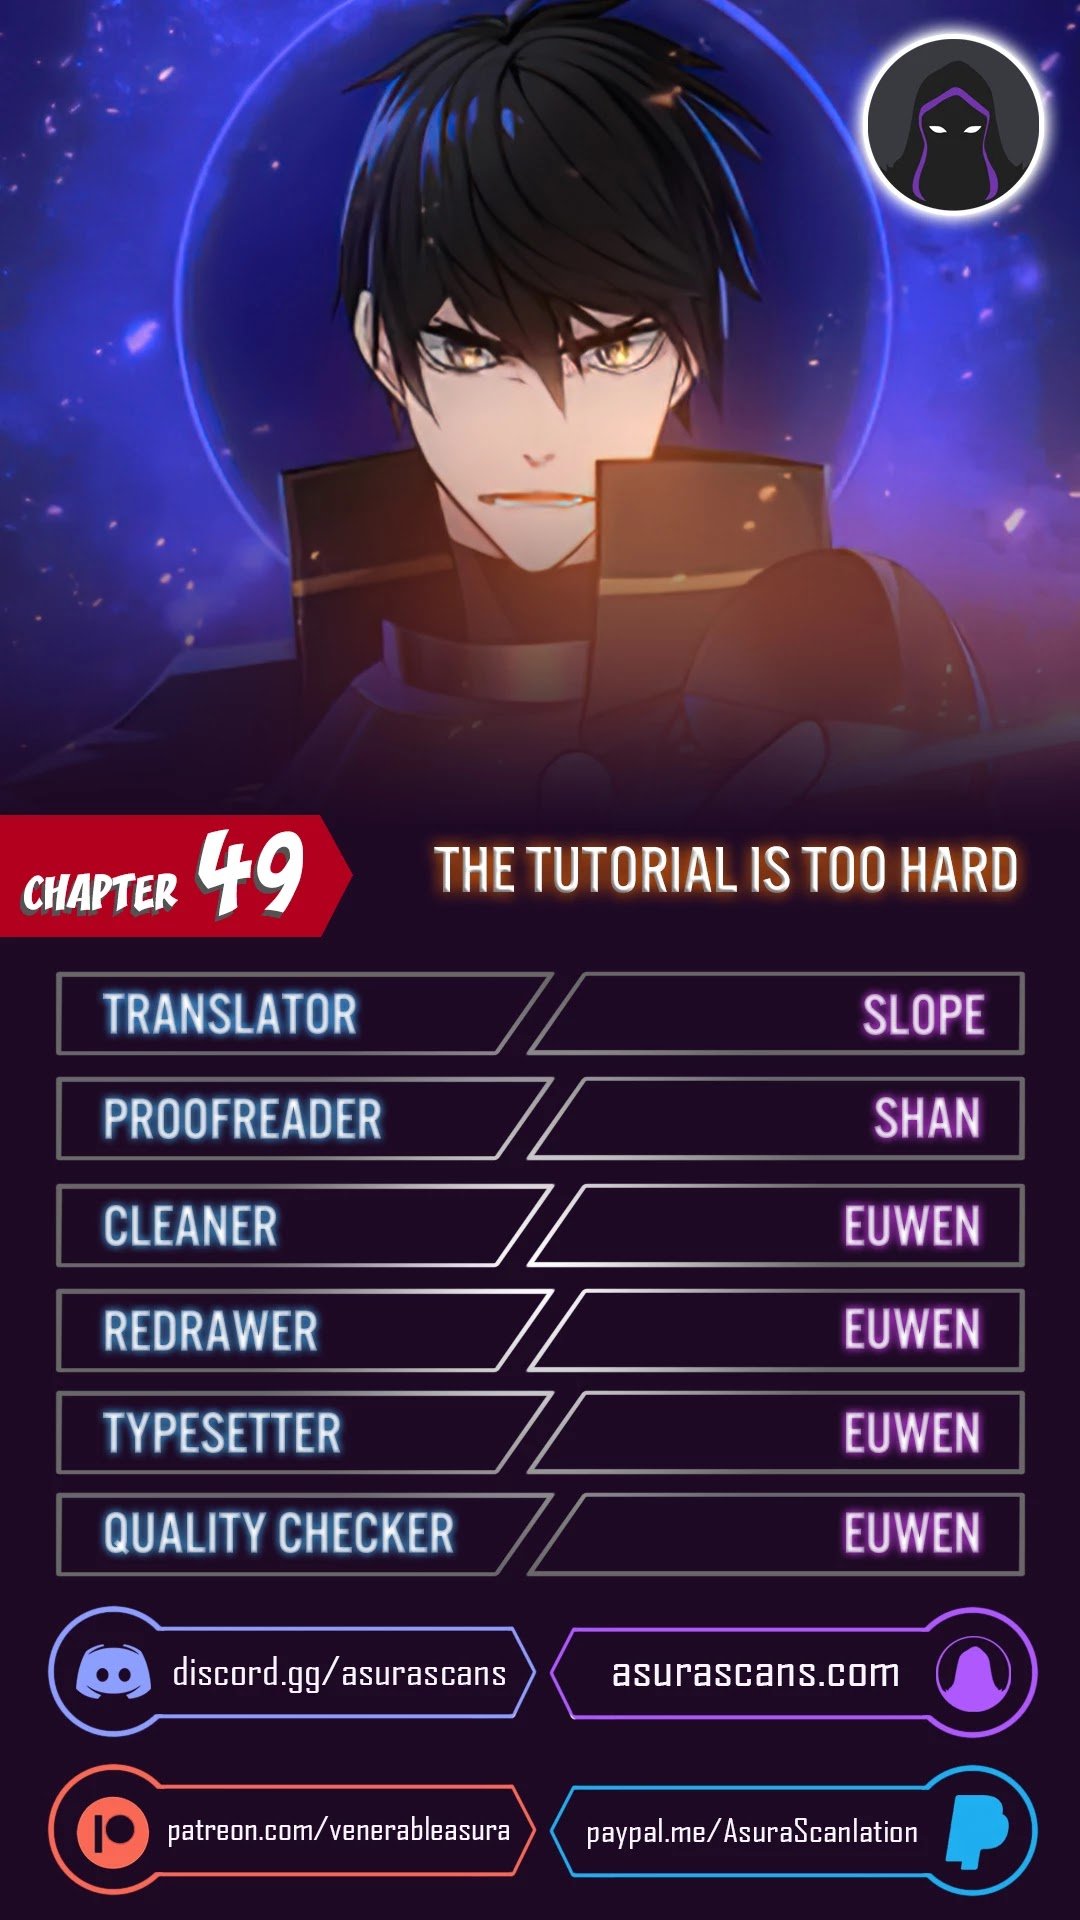 The Tutorial is Too Hard chapter 49